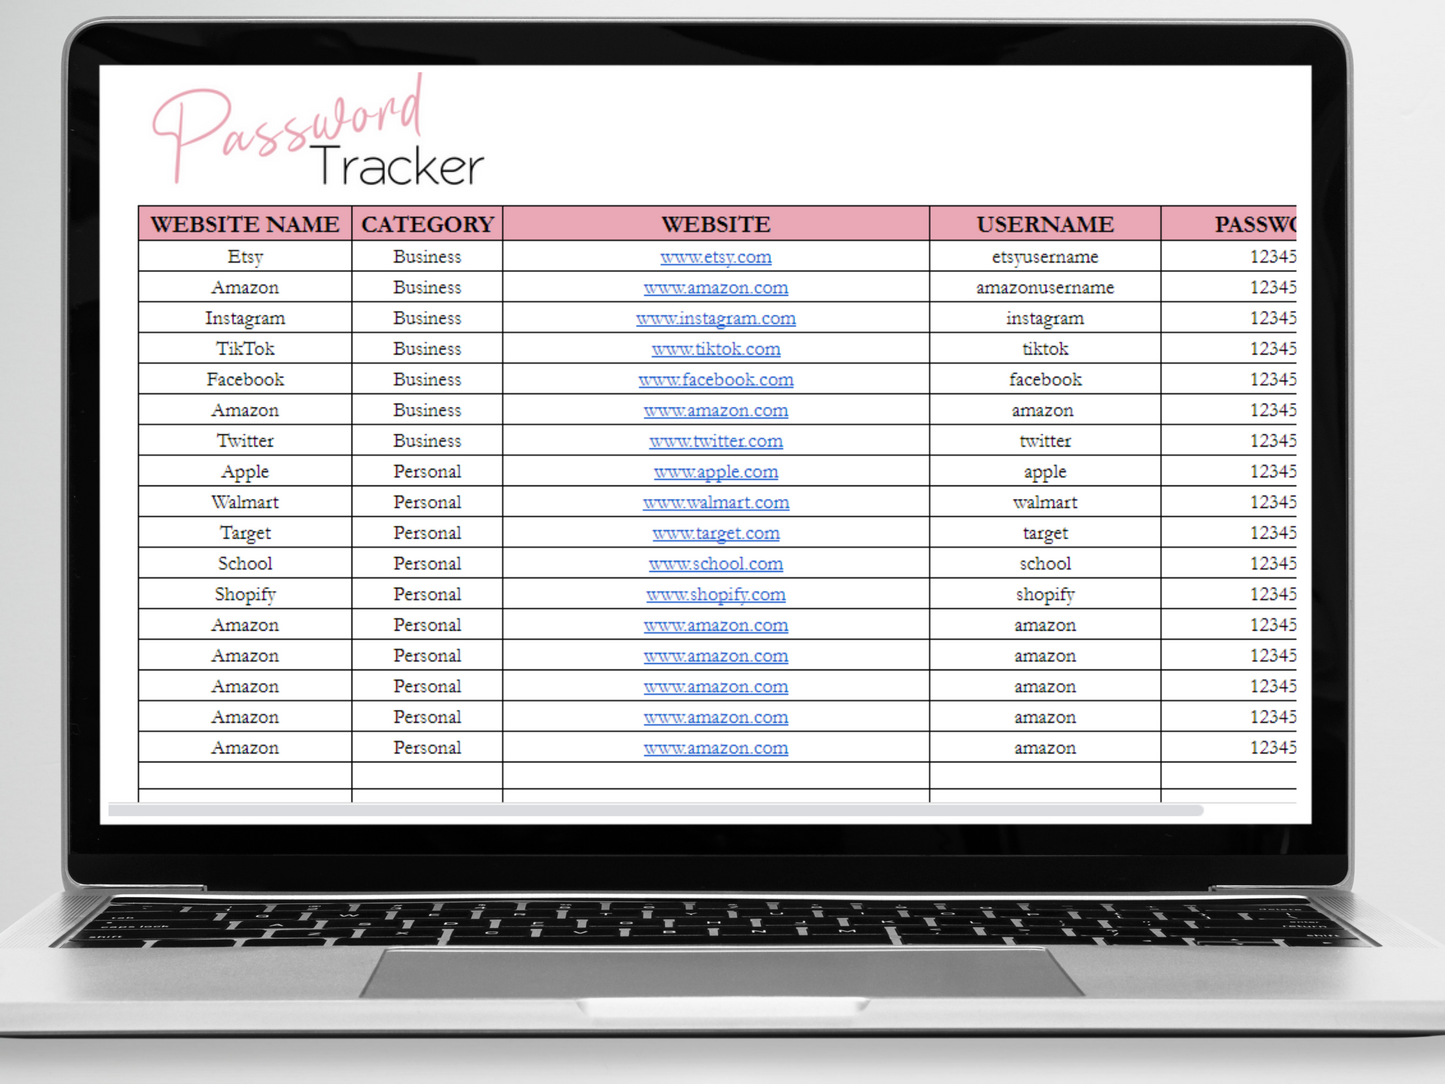 Small Business Bundle Template Google Sheets Excel Spreadsheet